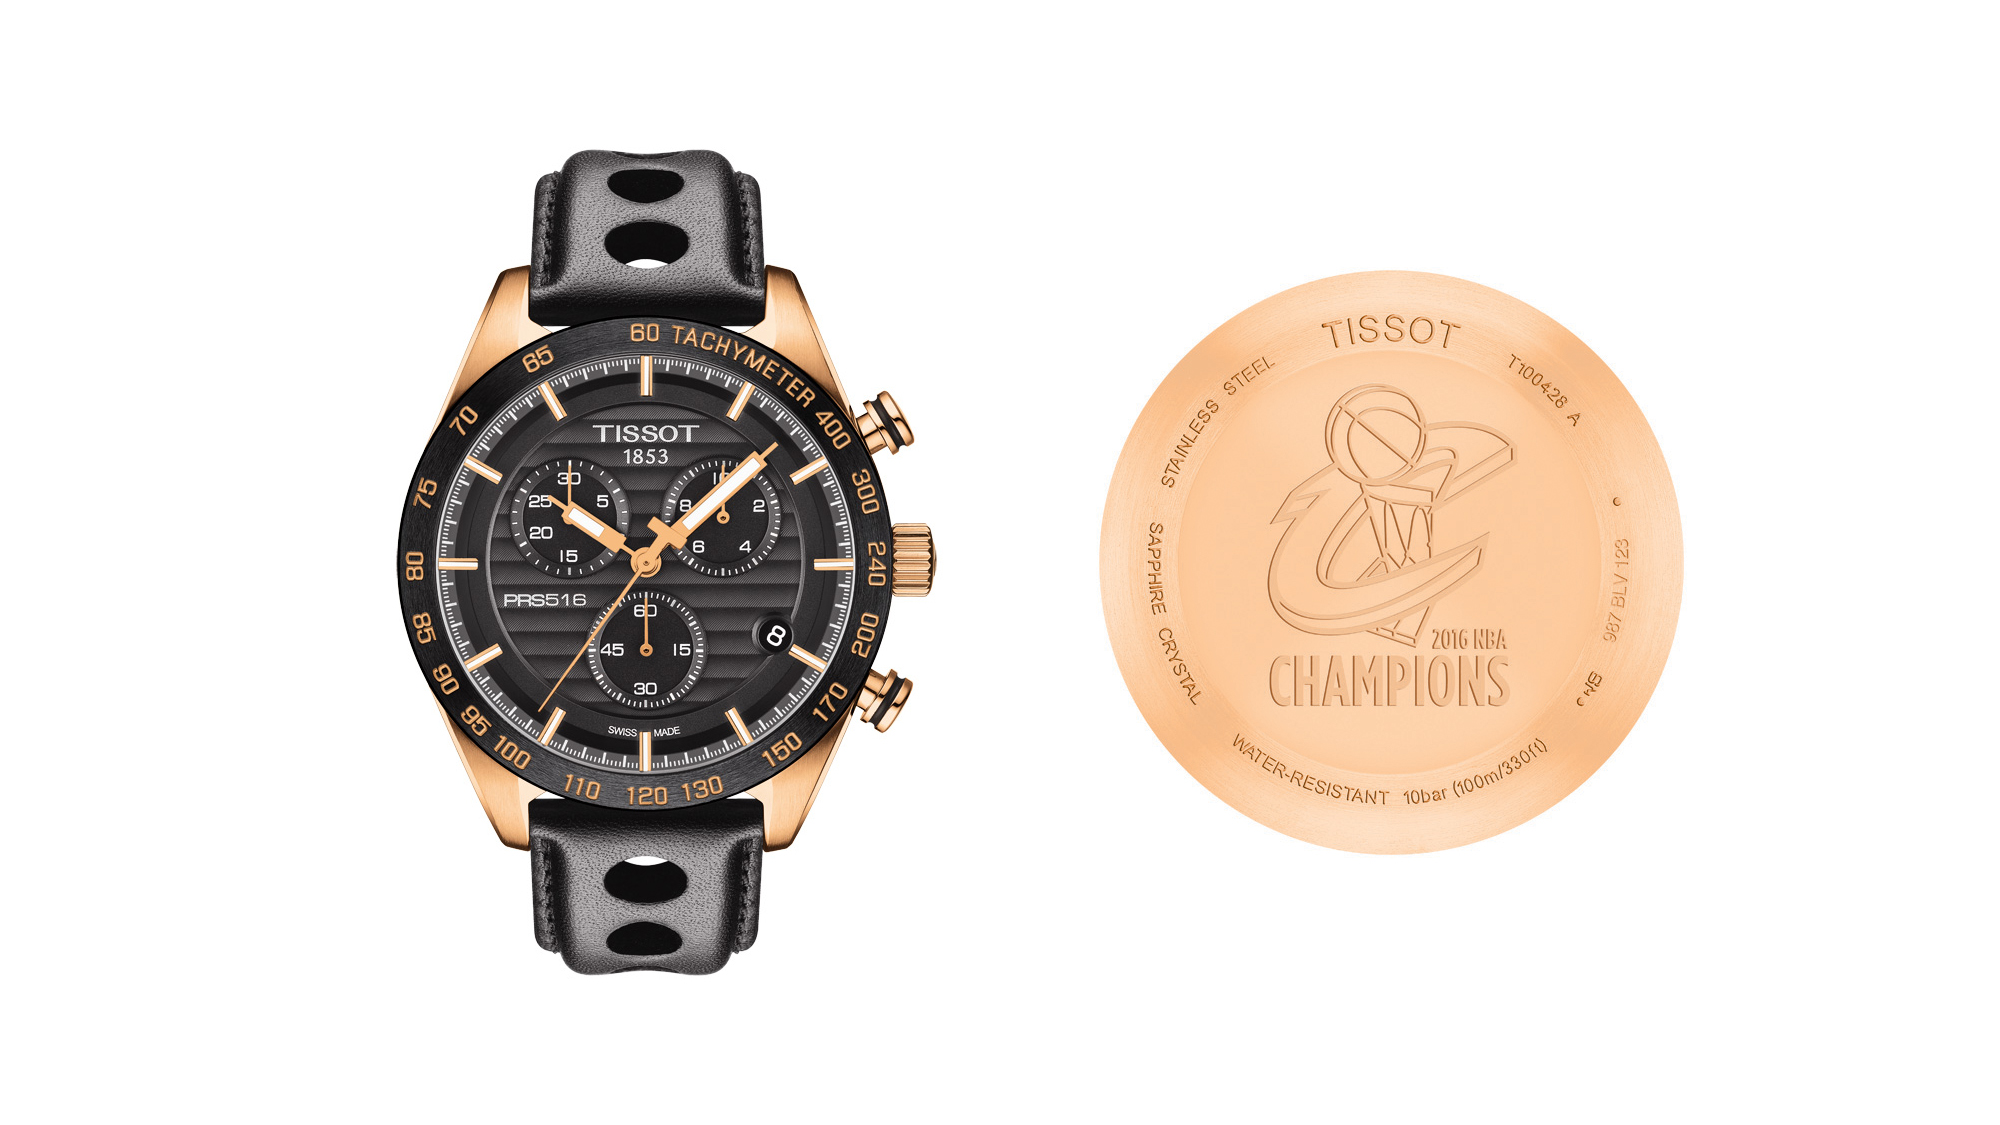 Introducing The First Ever NBA Championship Watch, By Tissot For the Cleveland Cavaliers